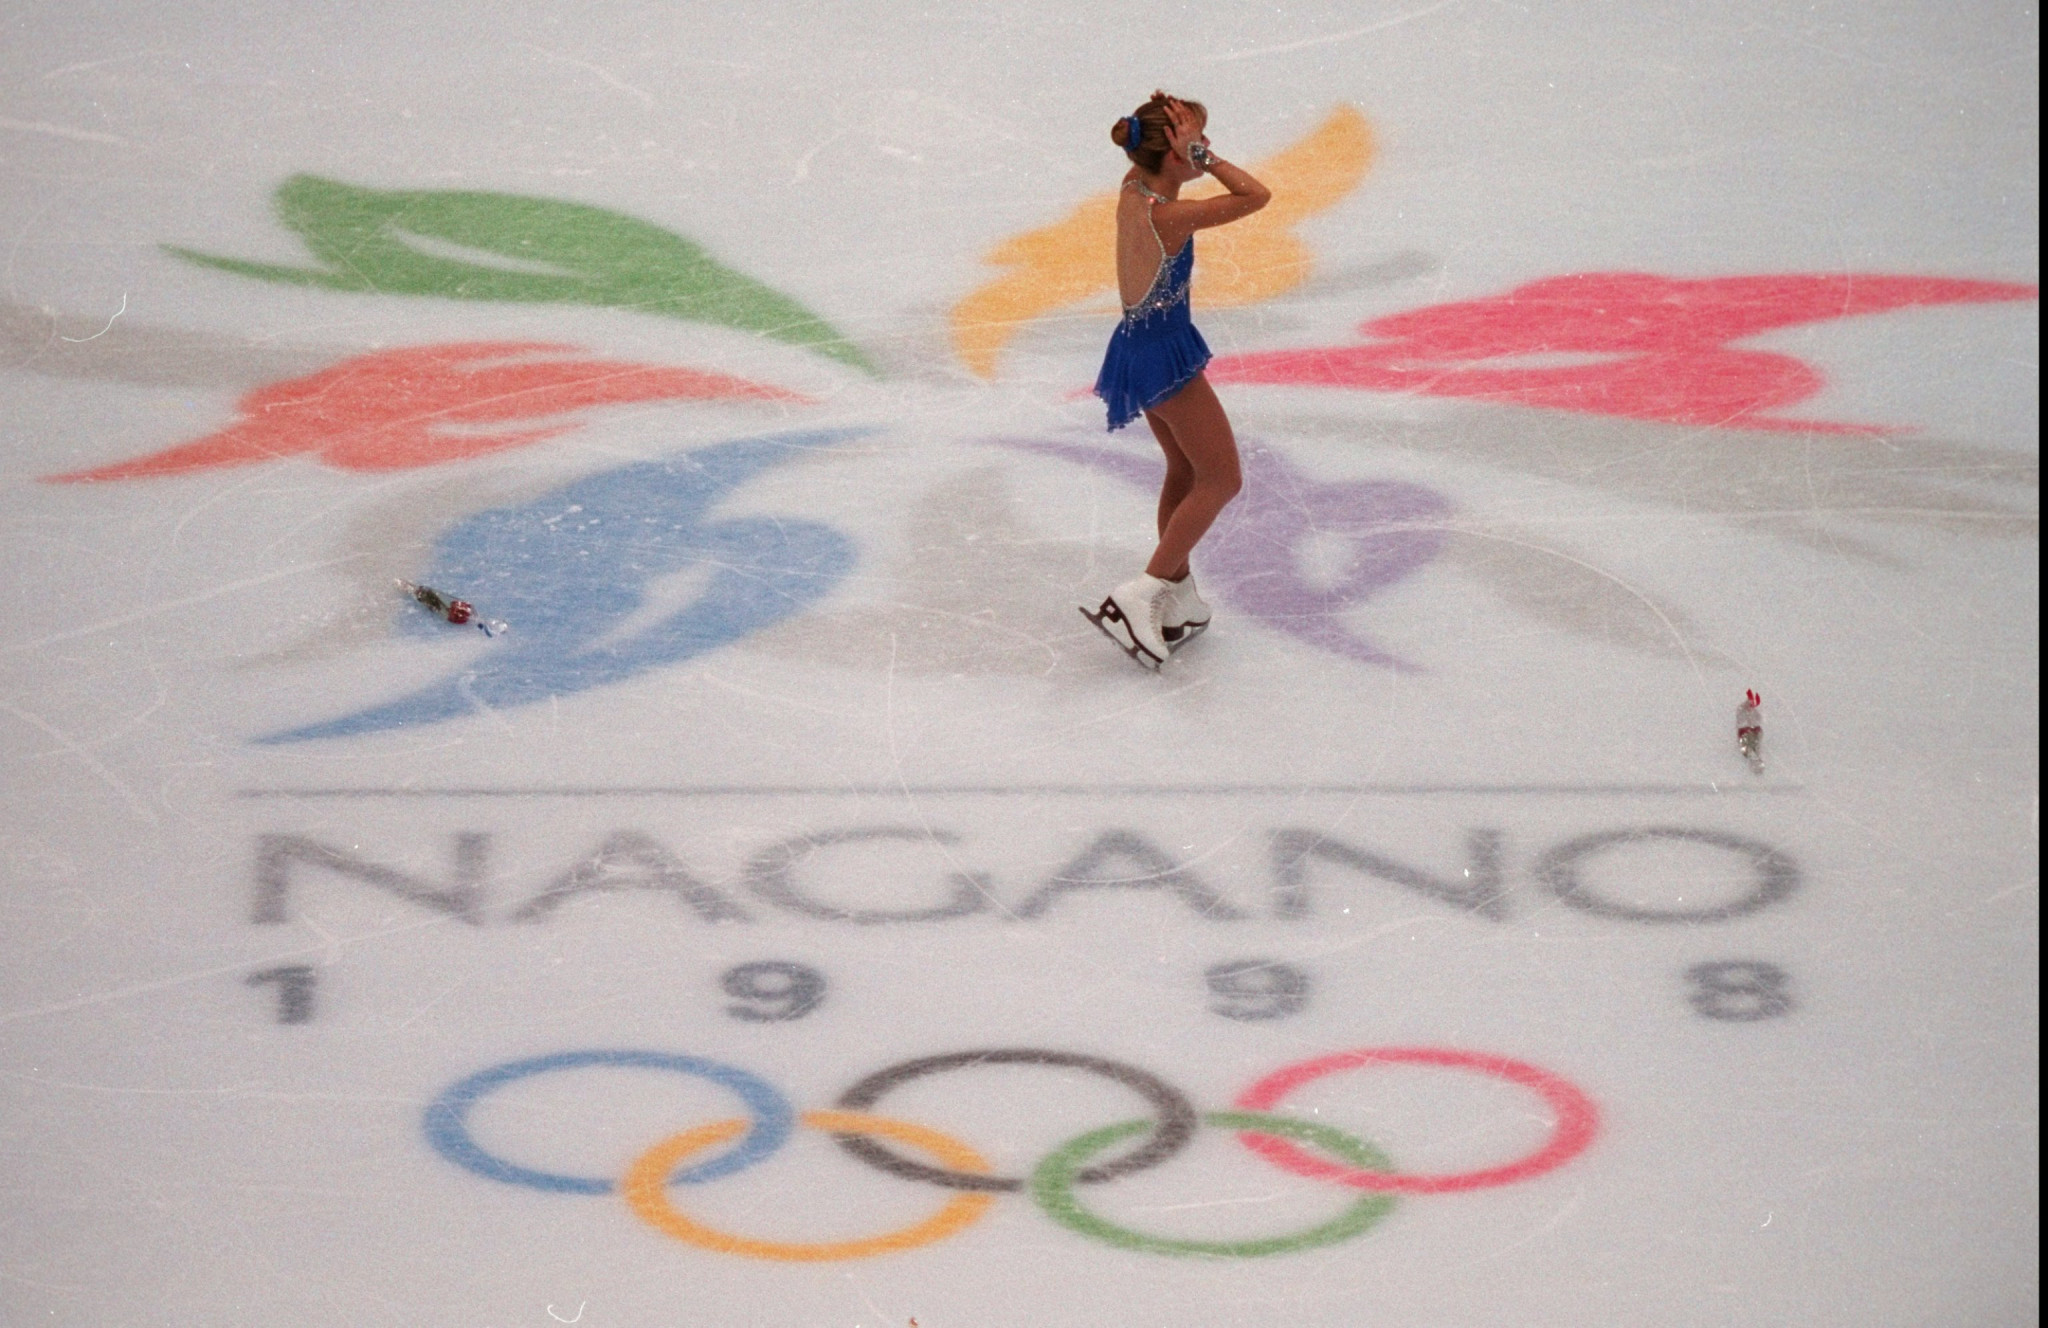 Richard Callaghan coached US athlete Tara Lipinski to Winter Olympics gold in Nagano in 1998 ©Getty Images 